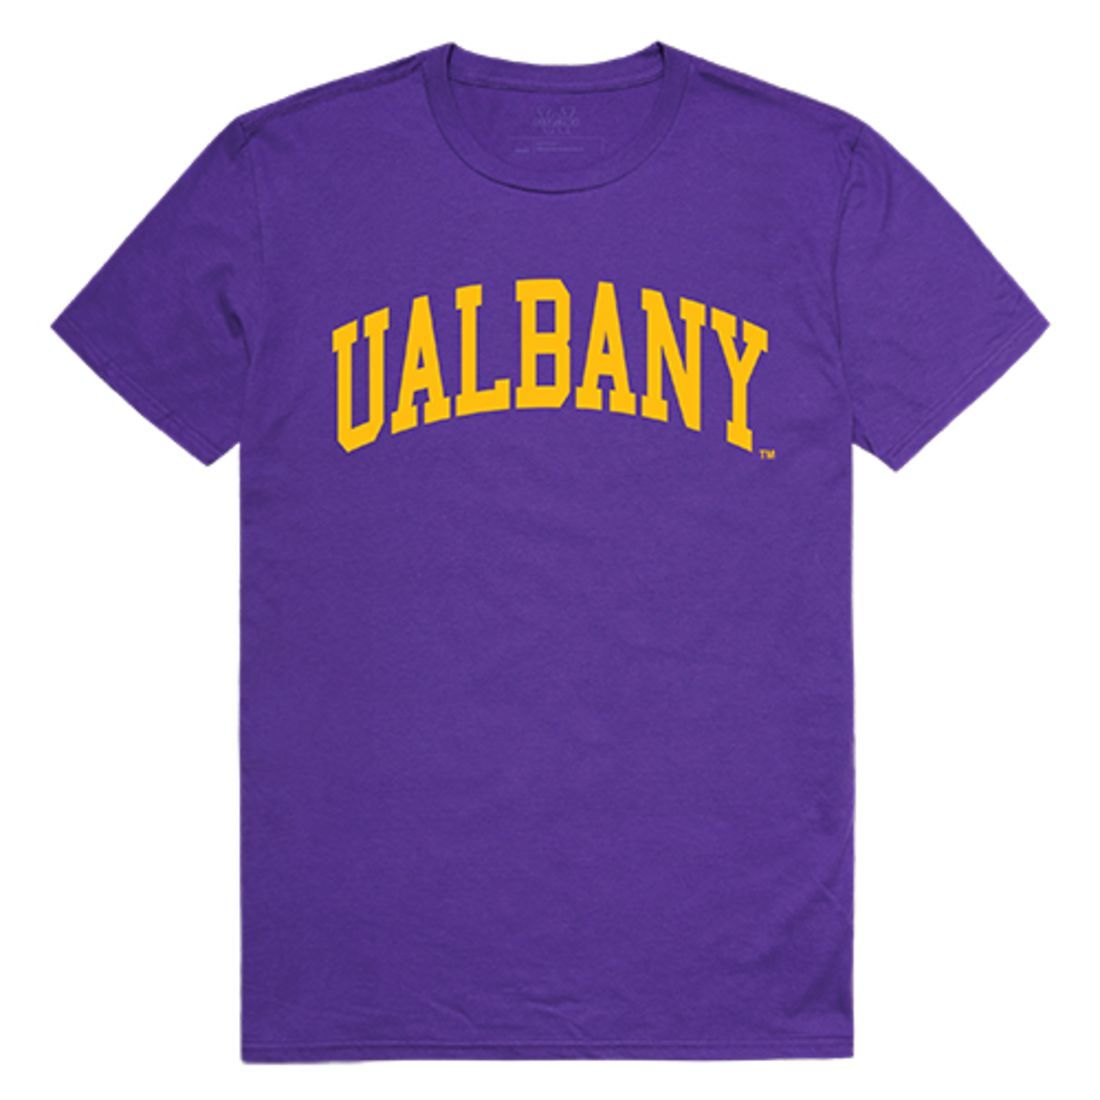 UAlbany University at Albany The Great Danes College T-Shirt Purple-Campus-Wardrobe